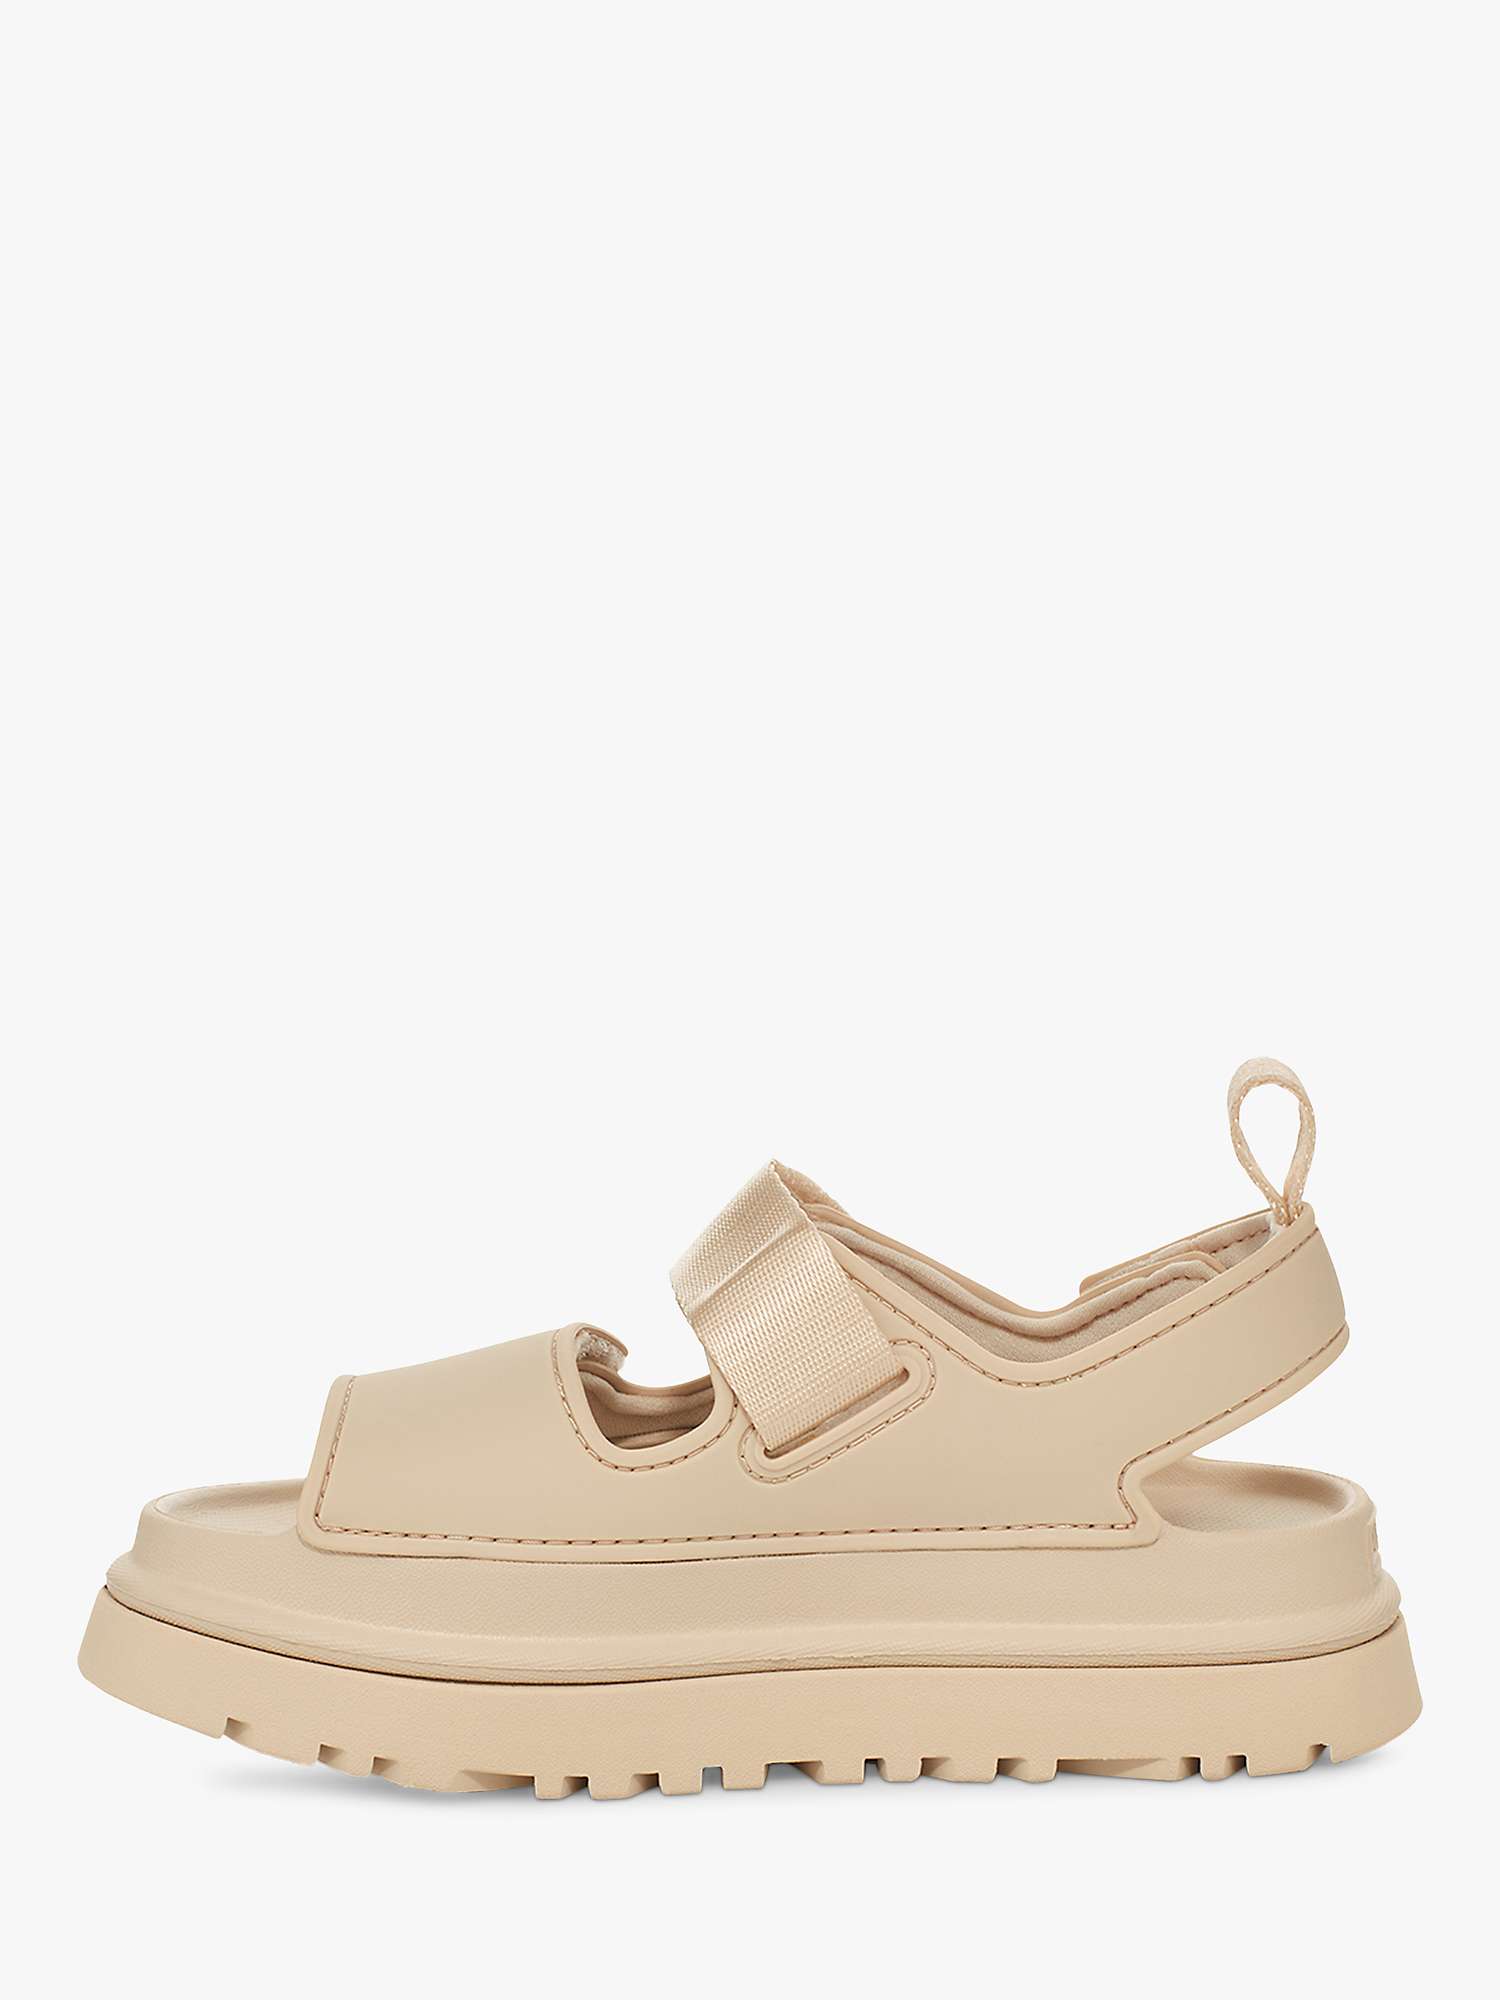 Buy UGG Kids' Goldenglow Chunky Sandals, Neutral Online at johnlewis.com